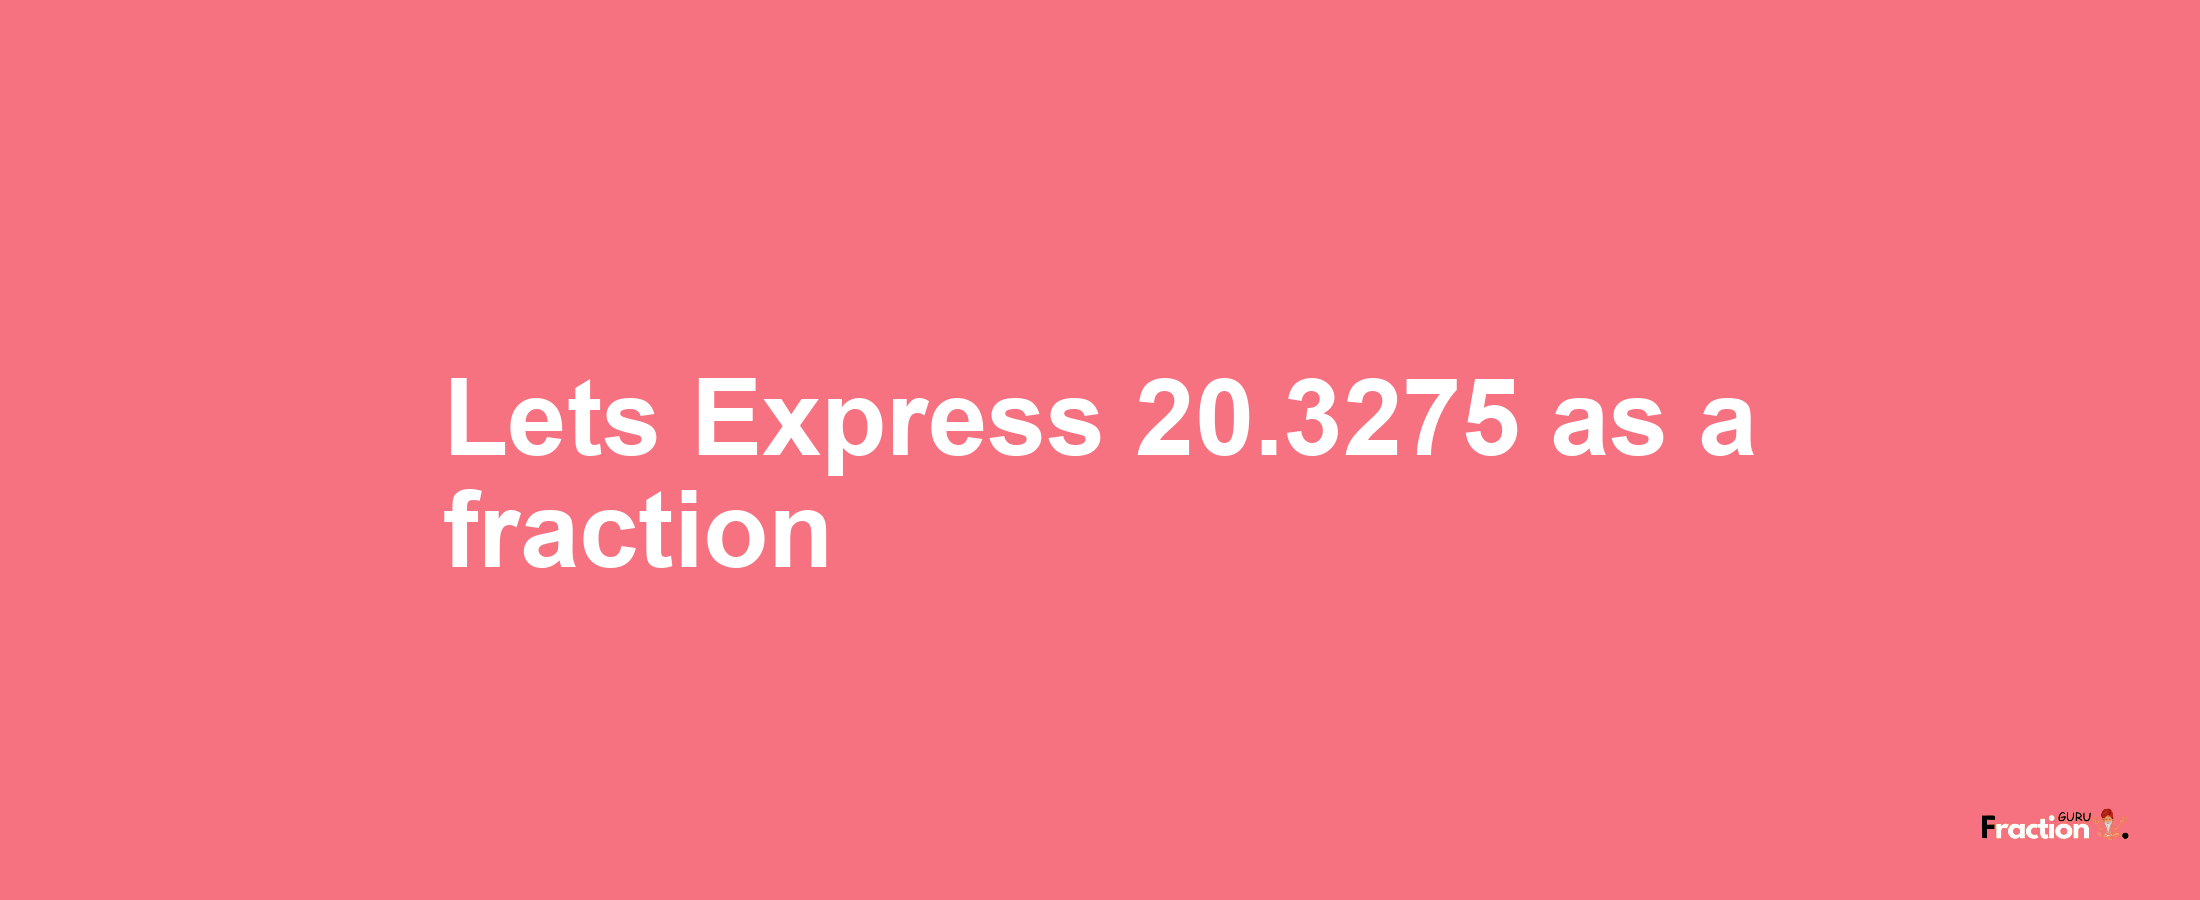 Lets Express 20.3275 as afraction